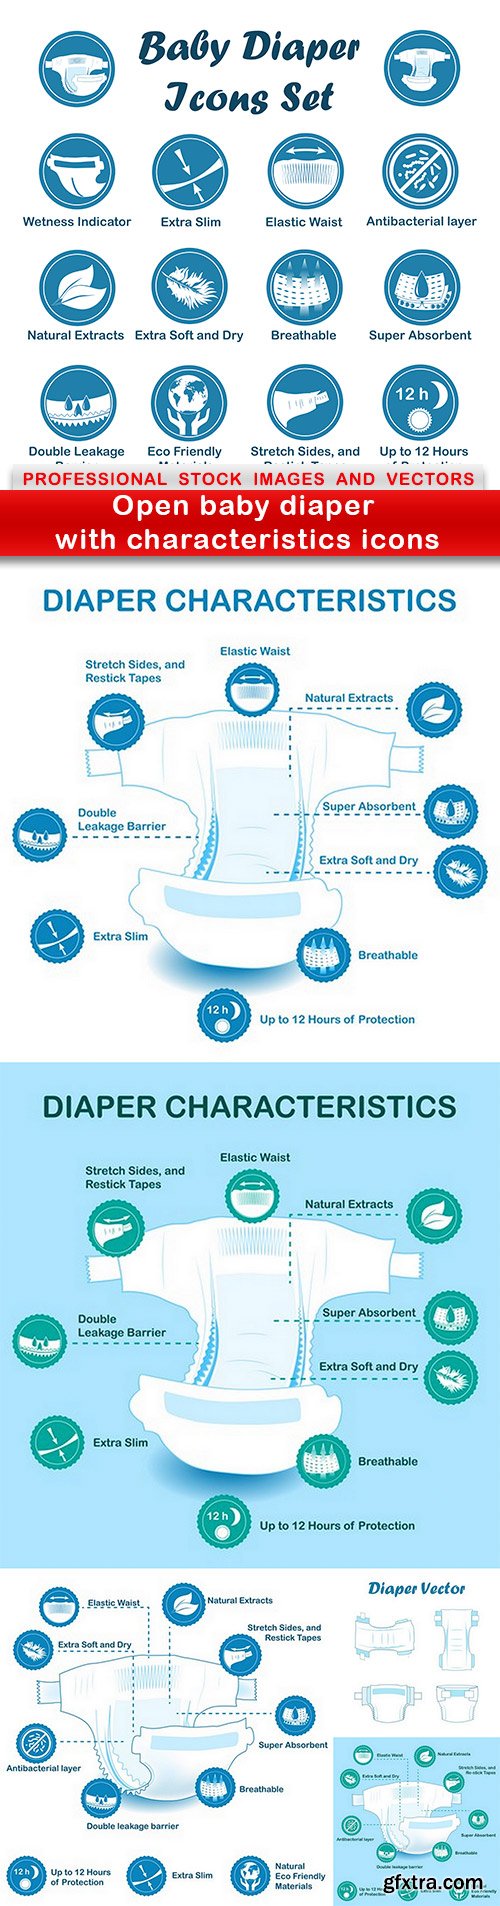 Open baby diaper with characteristics icons - 6 EPS